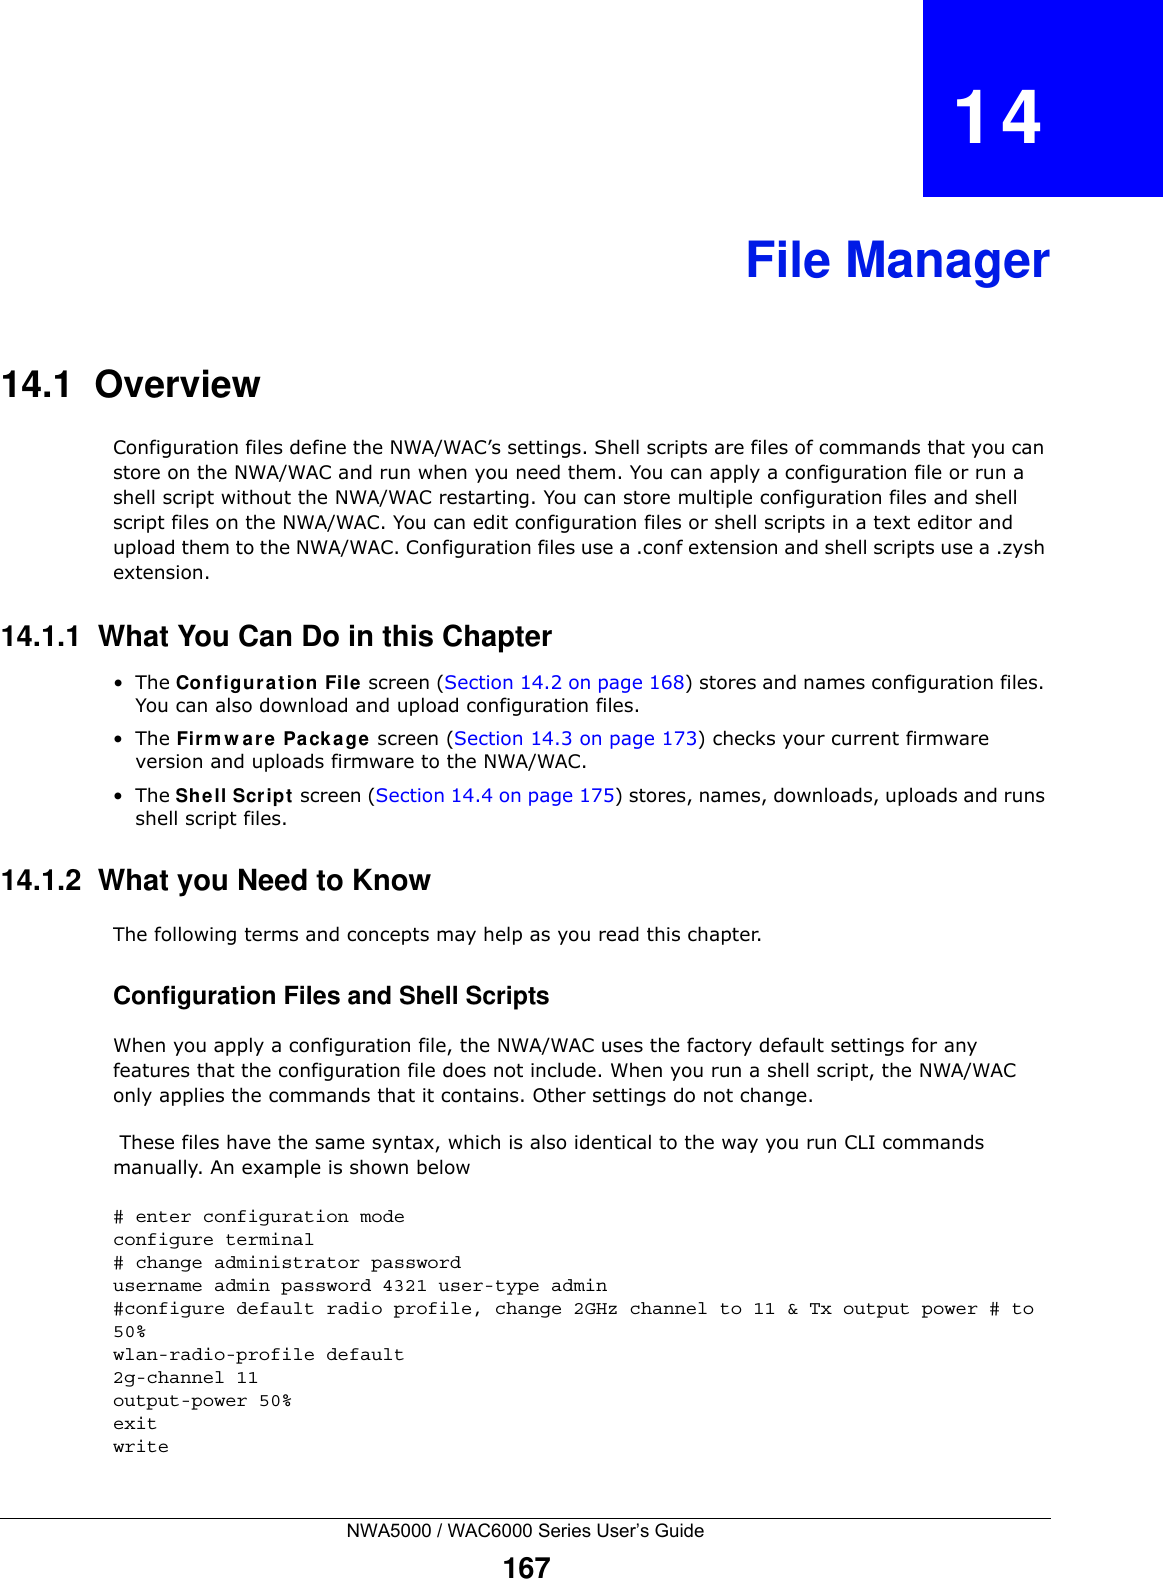 NWA5000 / WAC6000 Series User’s Guide167CHAPTER   14File Manager14.1  OverviewConfiguration files define the NWA/WAC’s settings. Shell scripts are files of commands that you can store on the NWA/WAC and run when you need them. You can apply a configuration file or run a shell script without the NWA/WAC restarting. You can store multiple configuration files and shell script files on the NWA/WAC. You can edit configuration files or shell scripts in a text editor and upload them to the NWA/WAC. Configuration files use a .conf extension and shell scripts use a .zysh extension.14.1.1  What You Can Do in this Chapter•The Configura tion File  screen (Section 14.2 on page 168) stores and names configuration files. You can also download and upload configuration files.•The Firm w a re  Pack age screen (Section 14.3 on page 173) checks your current firmware version and uploads firmware to the NWA/WAC.•The Shell Script screen (Section 14.4 on page 175) stores, names, downloads, uploads and runs shell script files. 14.1.2  What you Need to KnowThe following terms and concepts may help as you read this chapter.Configuration Files and Shell ScriptsWhen you apply a configuration file, the NWA/WAC uses the factory default settings for any features that the configuration file does not include. When you run a shell script, the NWA/WAC only applies the commands that it contains. Other settings do not change. These files have the same syntax, which is also identical to the way you run CLI commands manually. An example is shown below# enter configuration modeconfigure terminal# change administrator passwordusername admin password 4321 user-type admin#configure default radio profile, change 2GHz channel to 11 &amp; Tx output power # to 50%wlan-radio-profile default2g-channel 11output-power 50%exitwrite